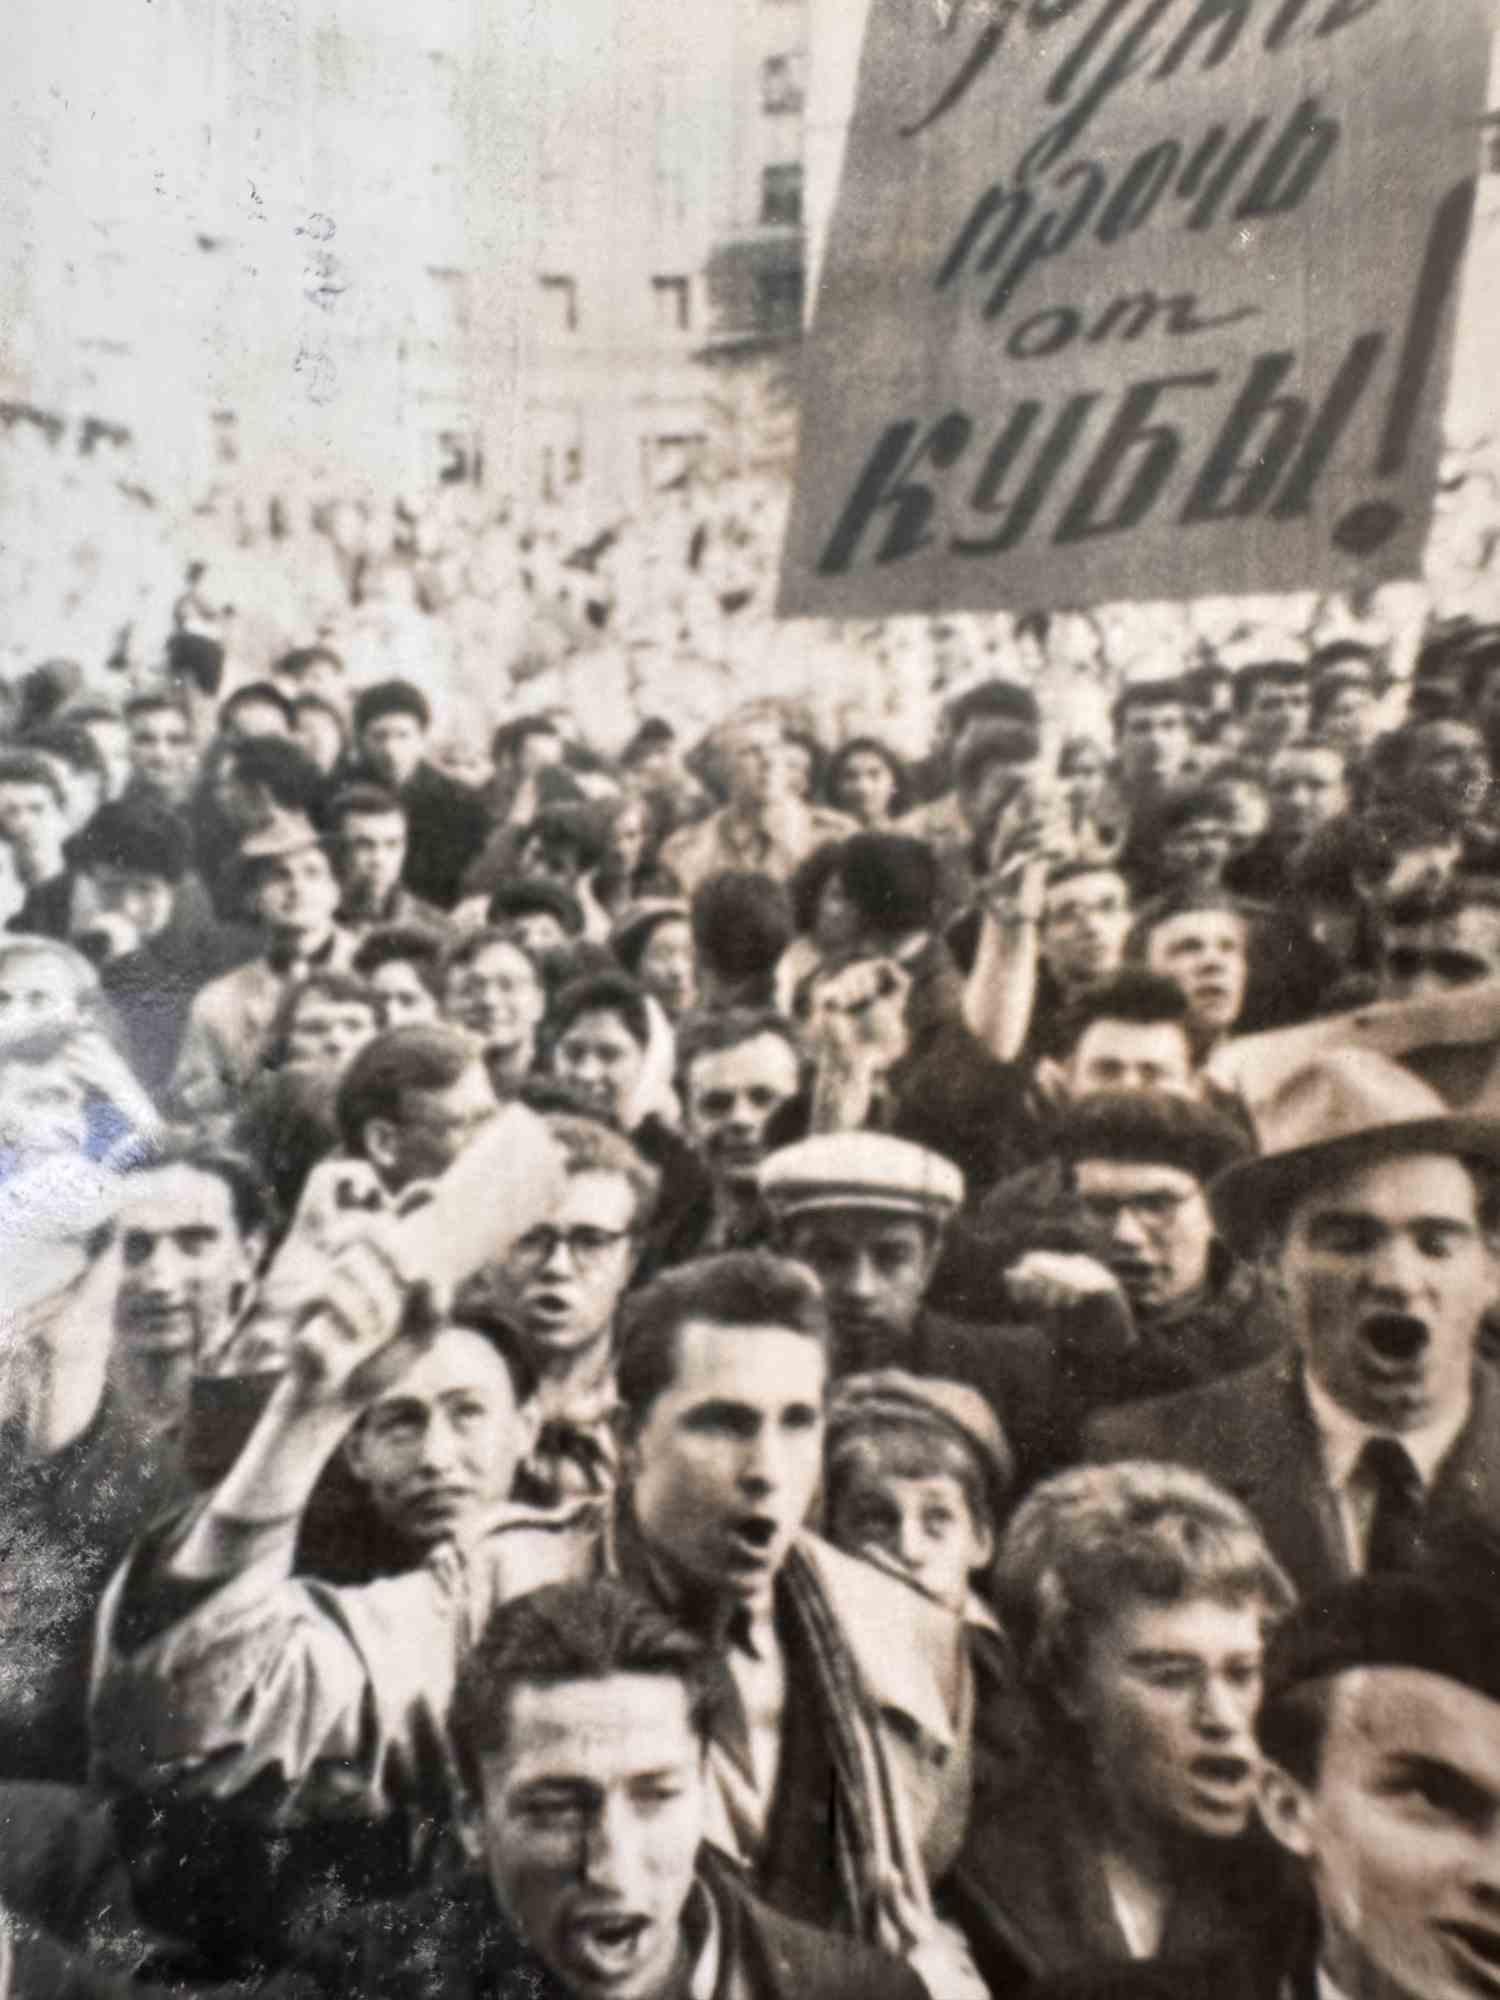 Unknown Figurative Photograph - Historical Photo - Manifestation in Moscow - 1960s